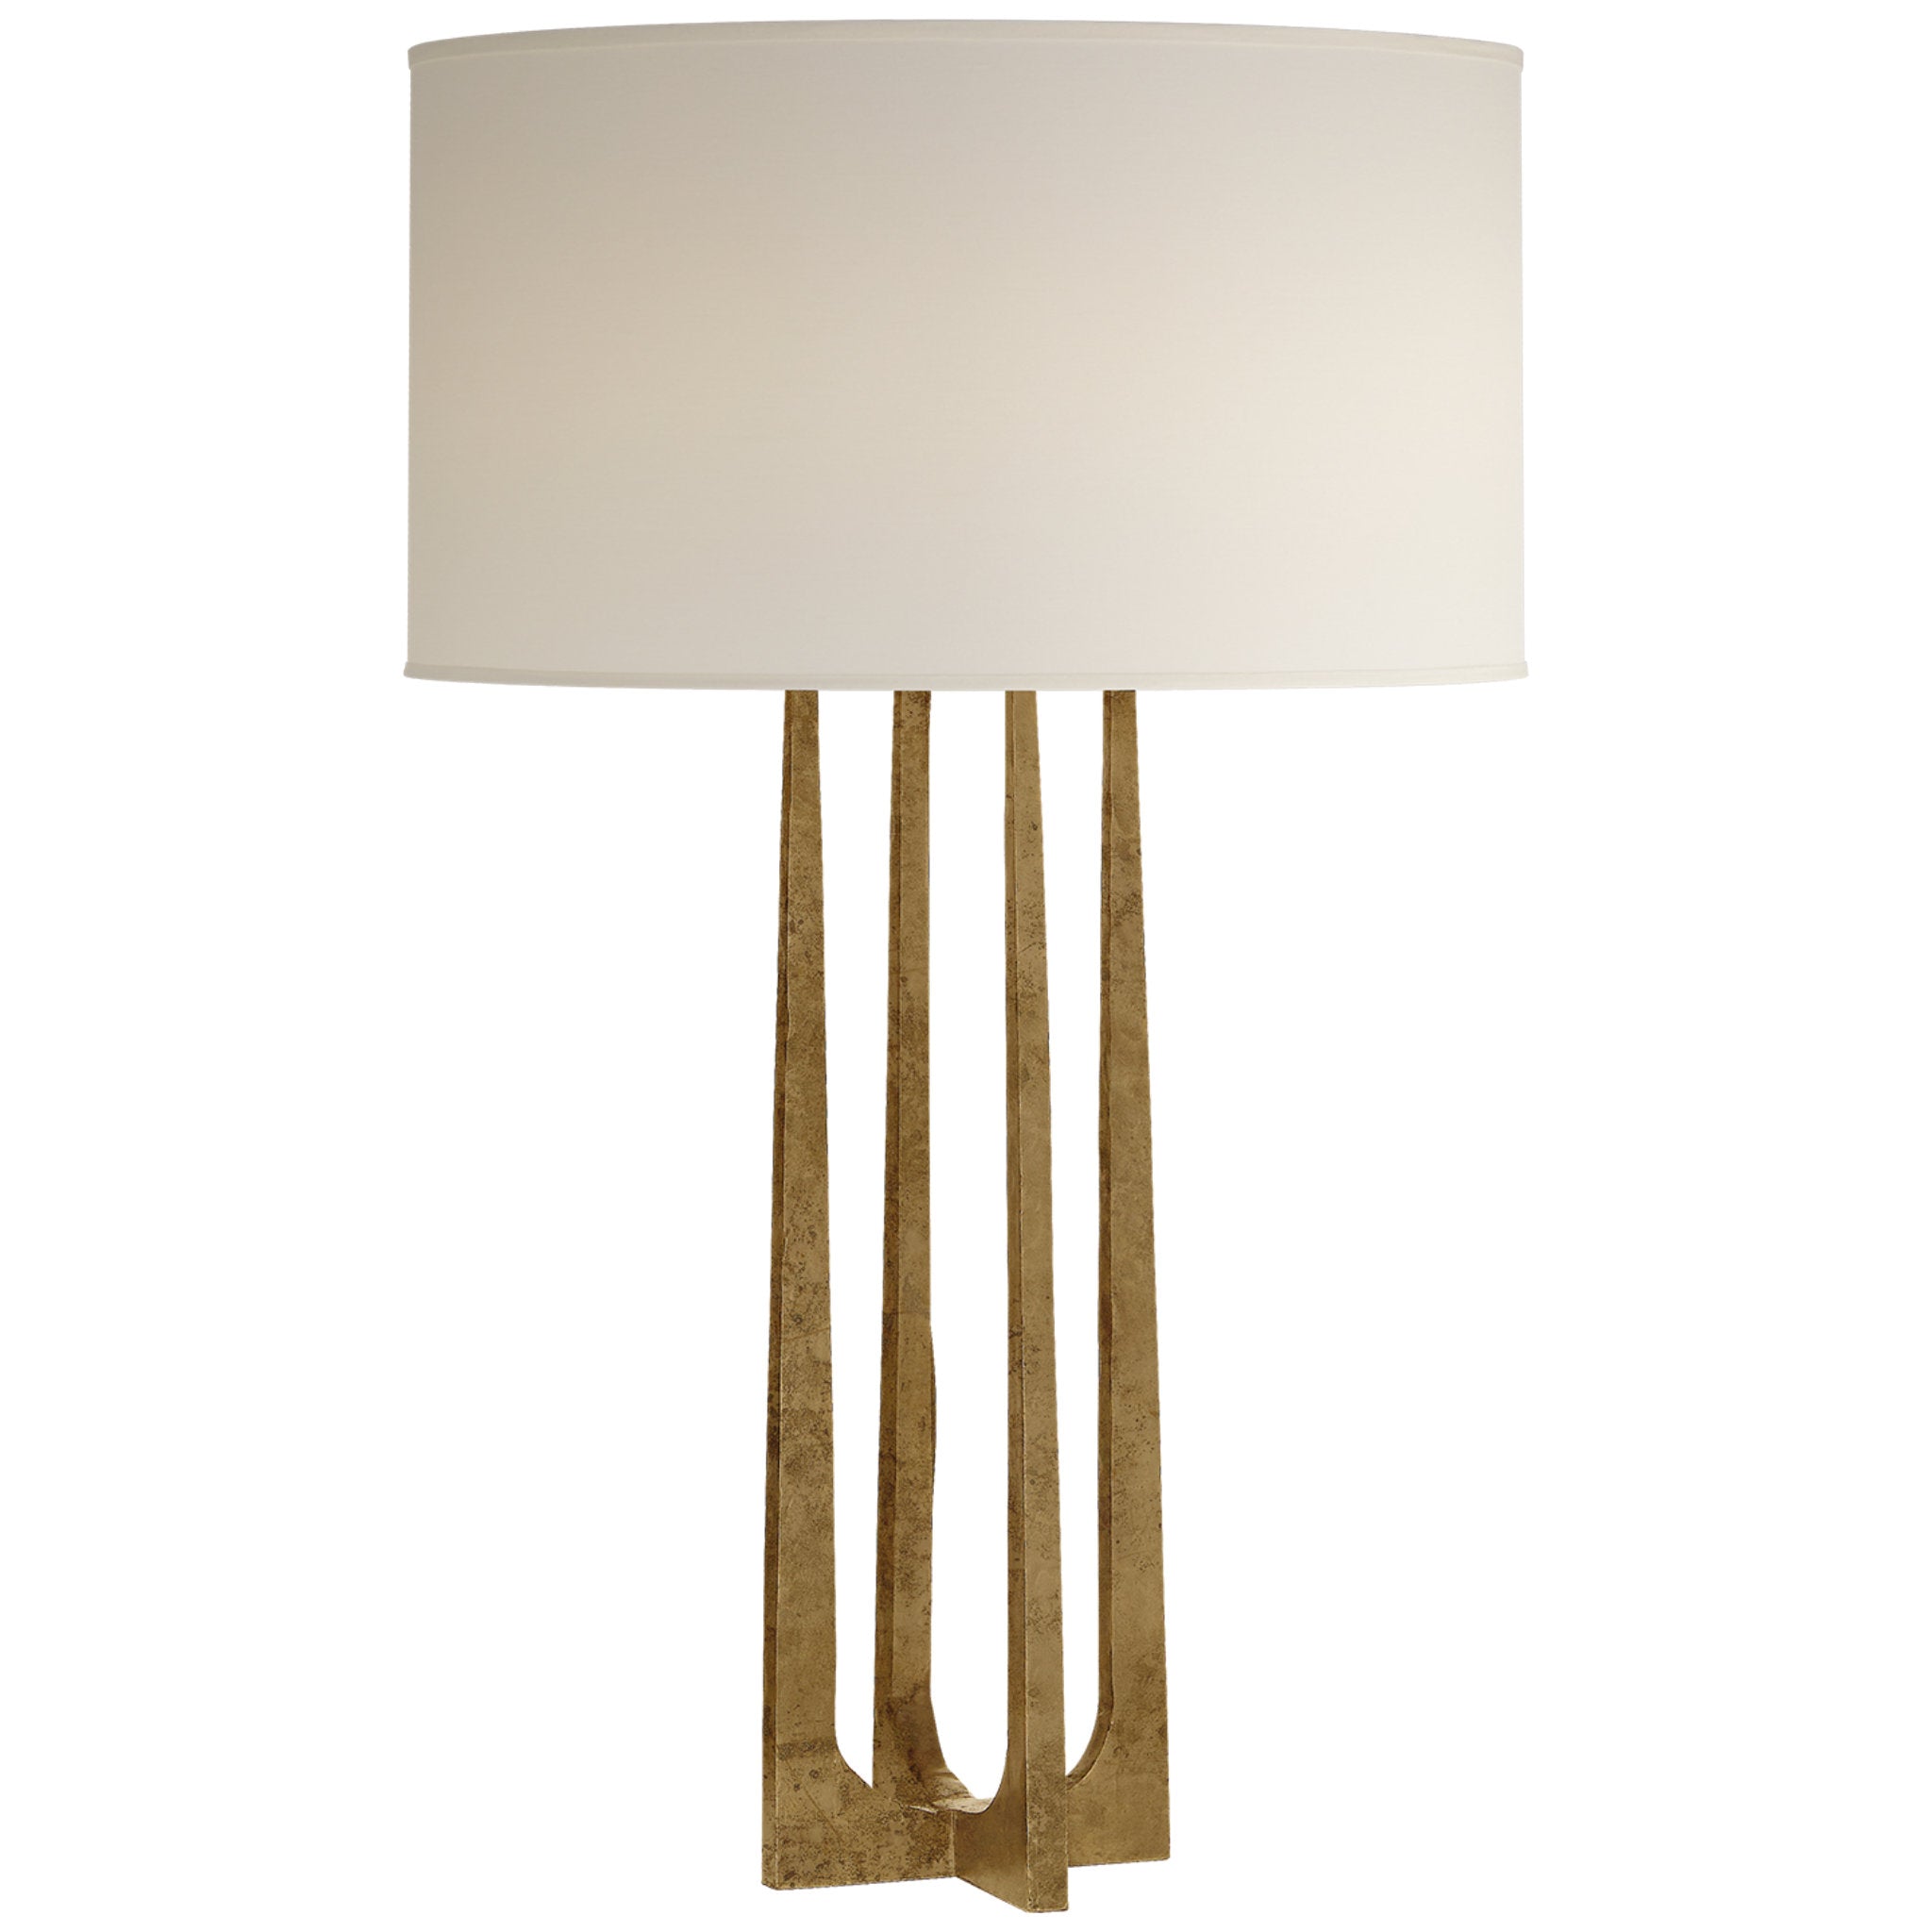 Ian K. Fowler Scala Hand-Forged Table Lamp in Gilded Iron with Natural Percale Shade